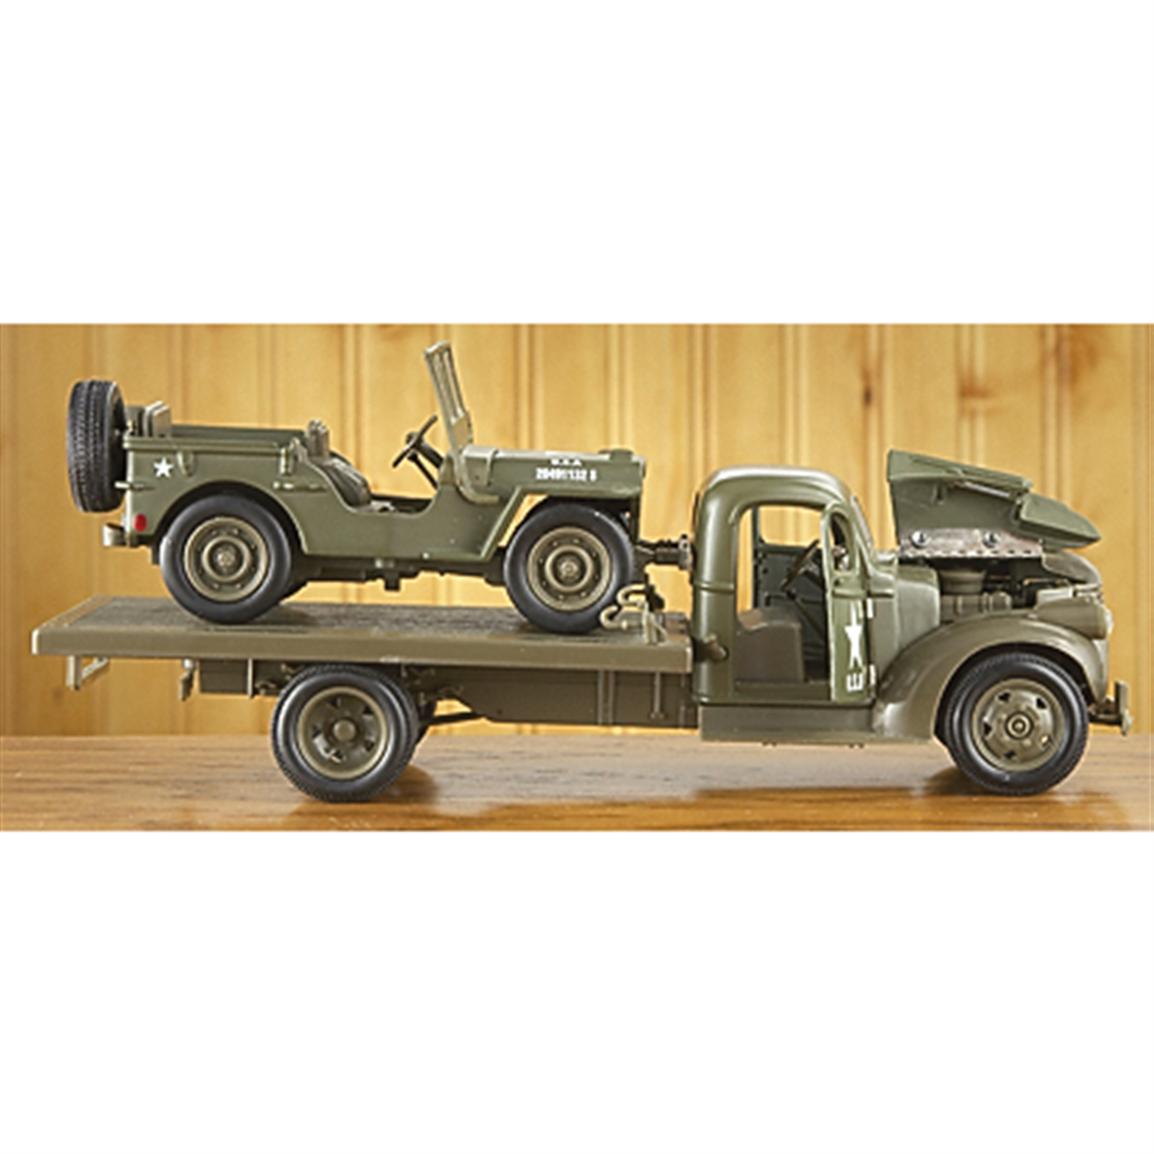 Pearl harbor us army flatbed tow truck and jeep #2